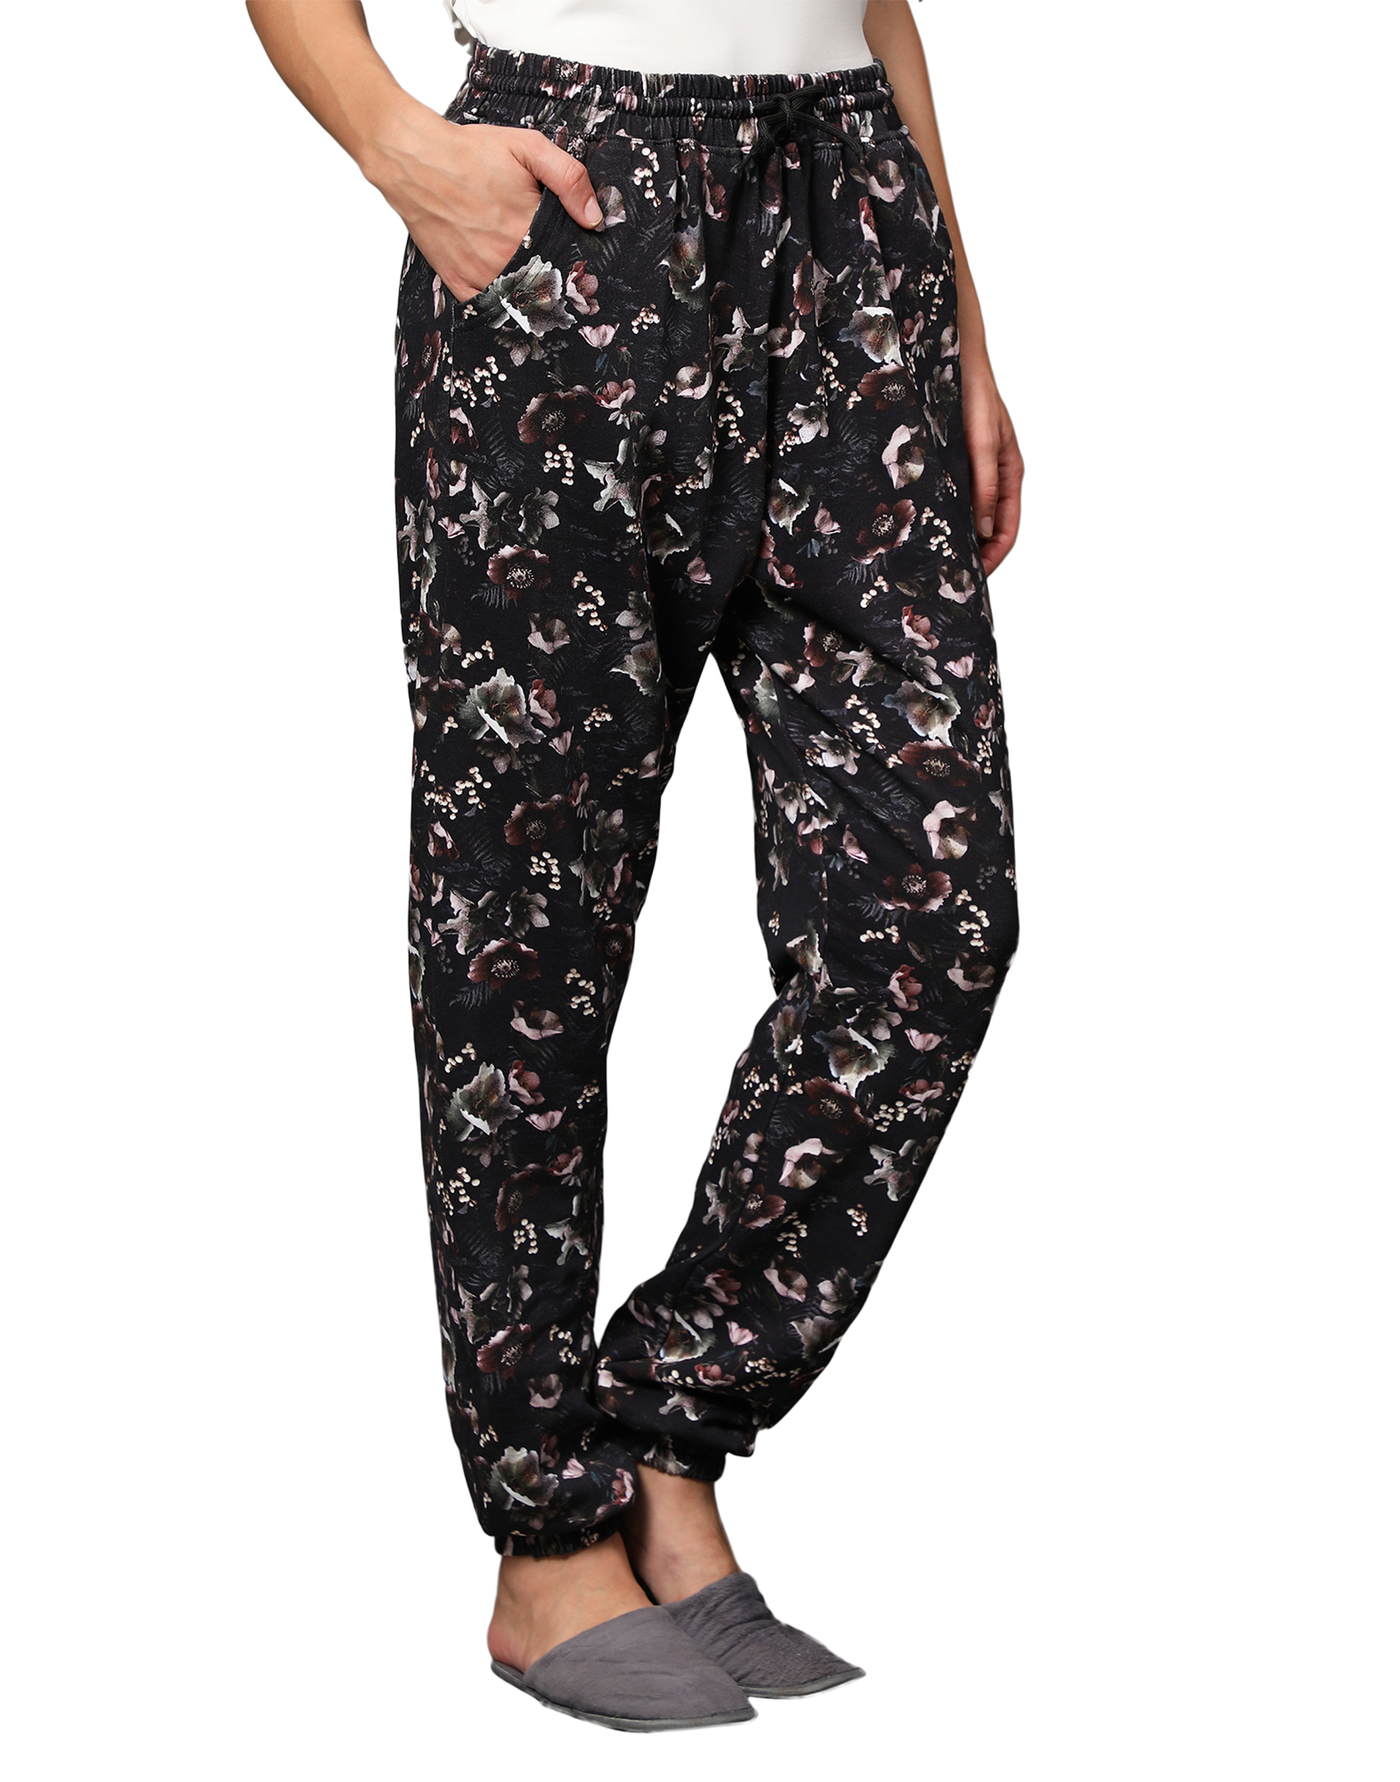 Lounge Pant for Women-Black Floral cuff